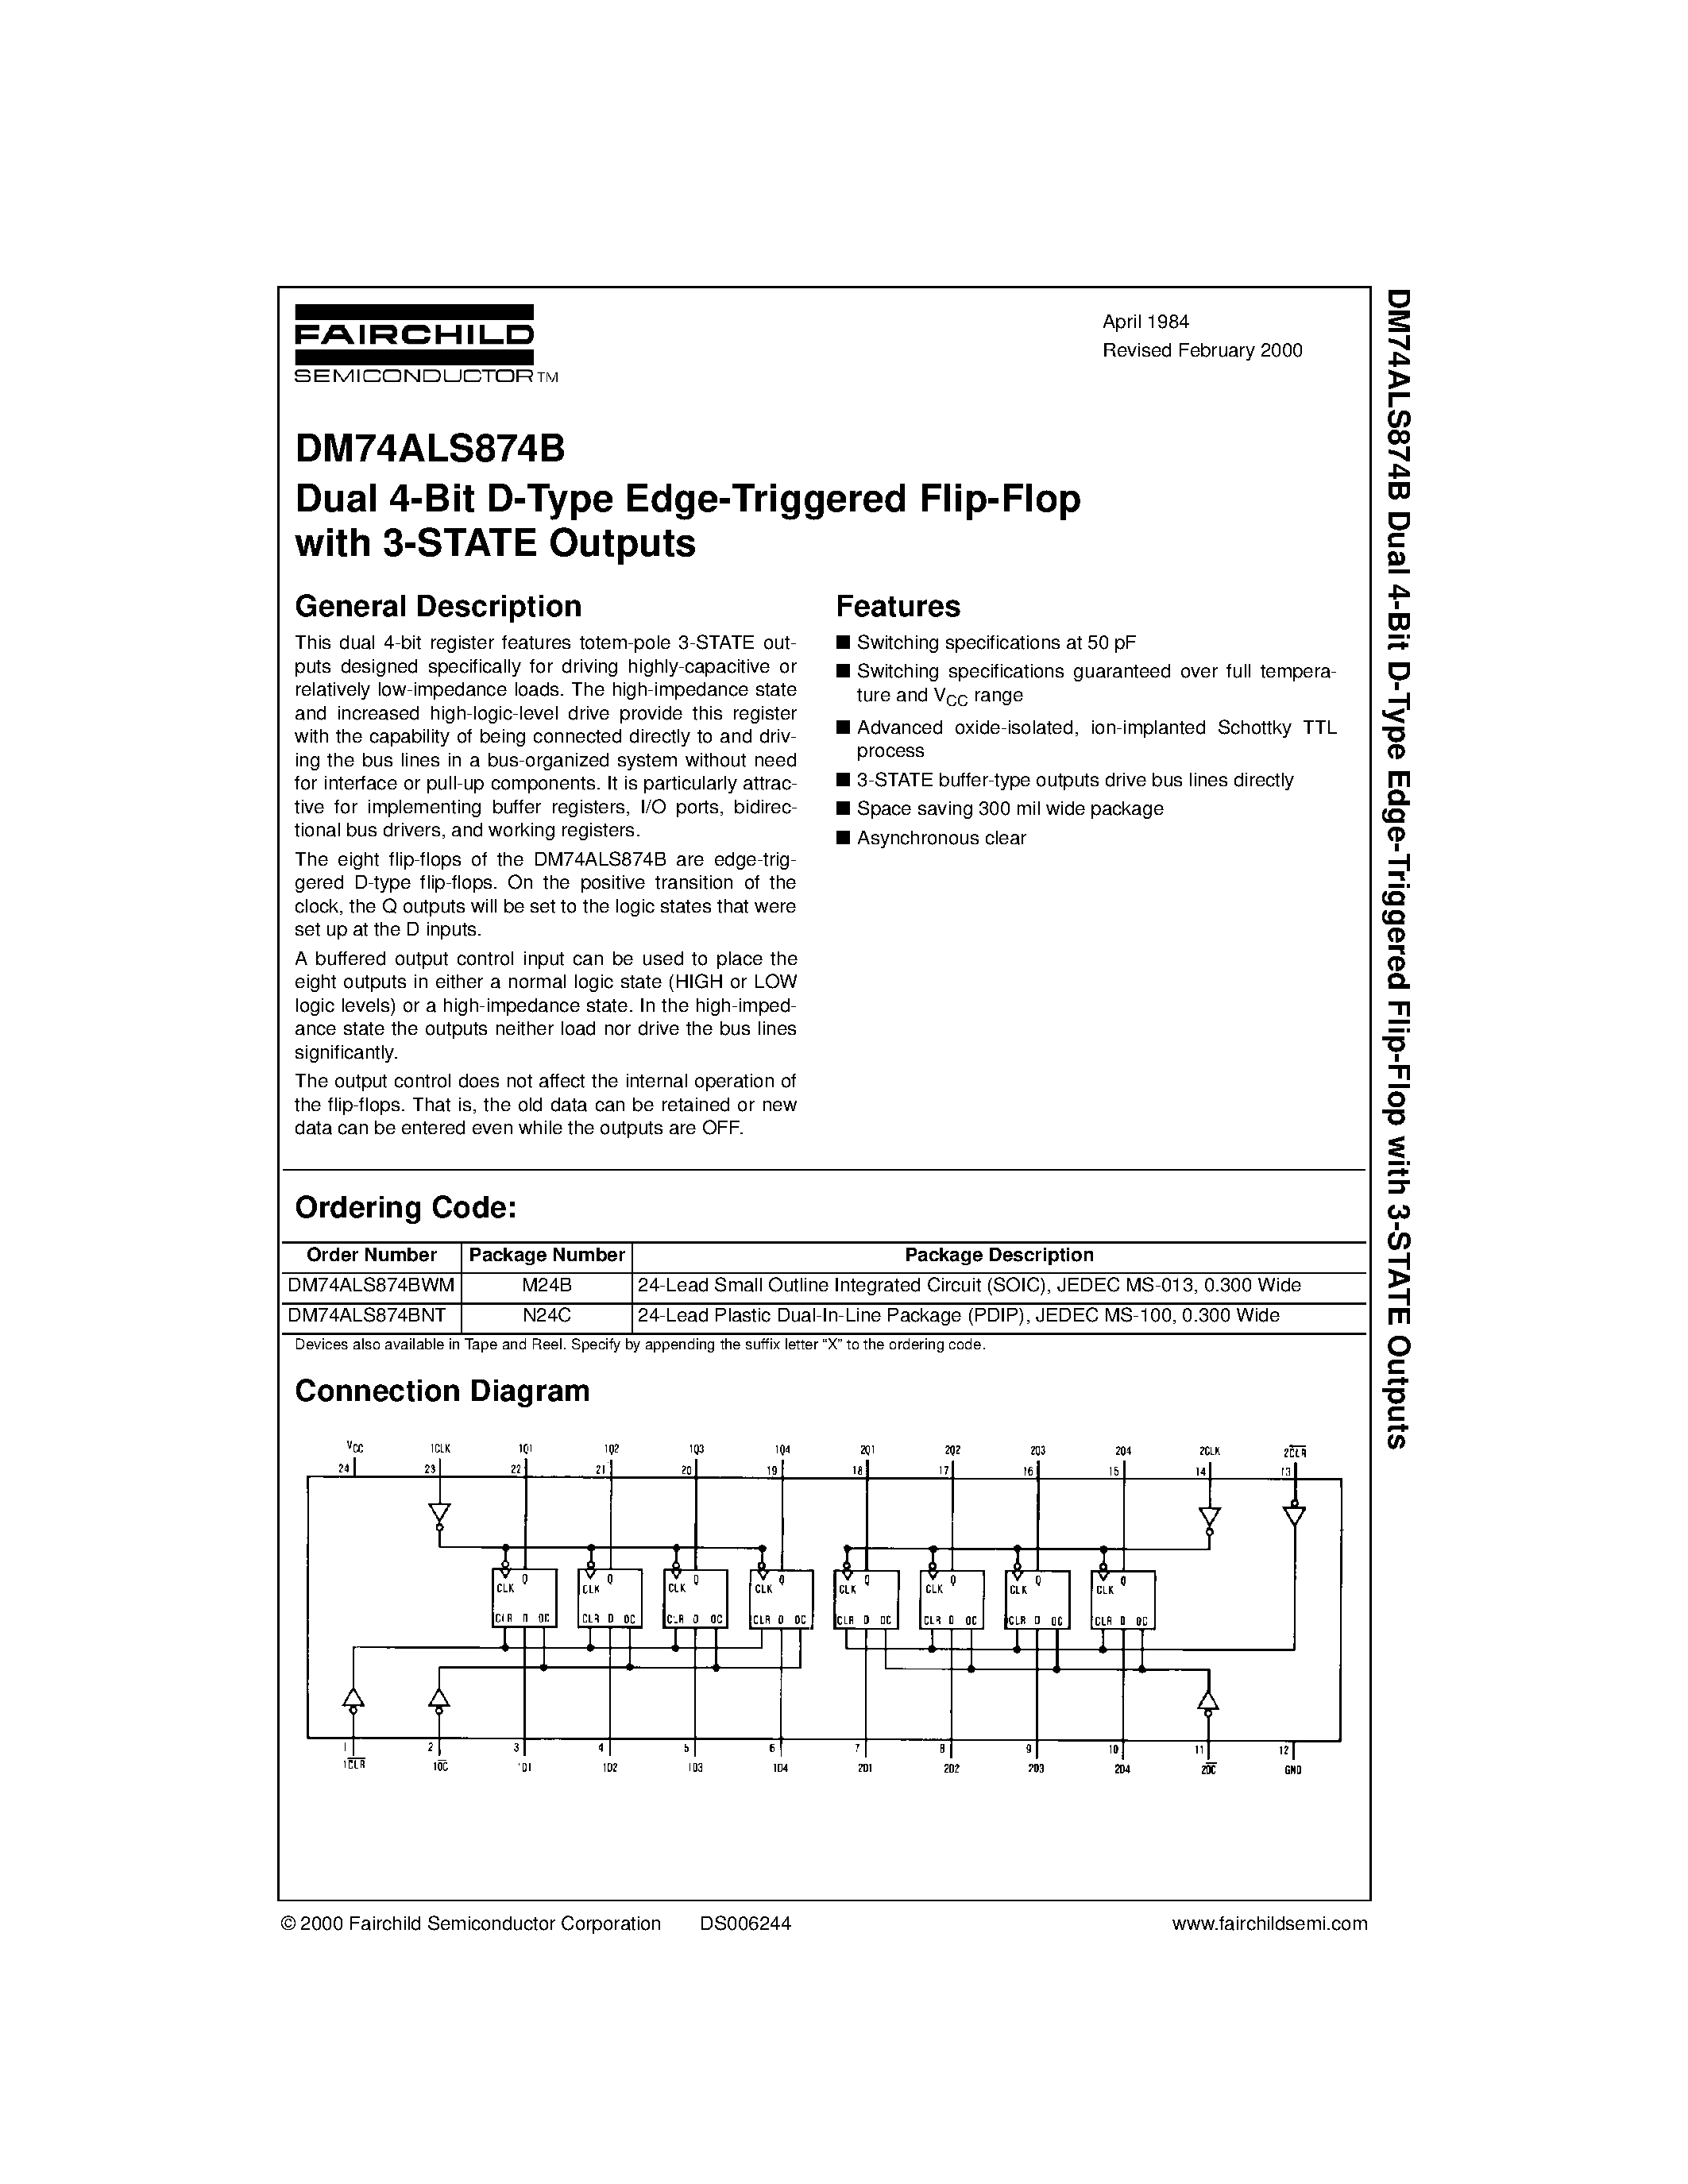 Datasheet DM74ALS874BNT - Dual 4-Bit D-Type Edge-Triggered Flip-Flop with 3-STATE Outputs page 1